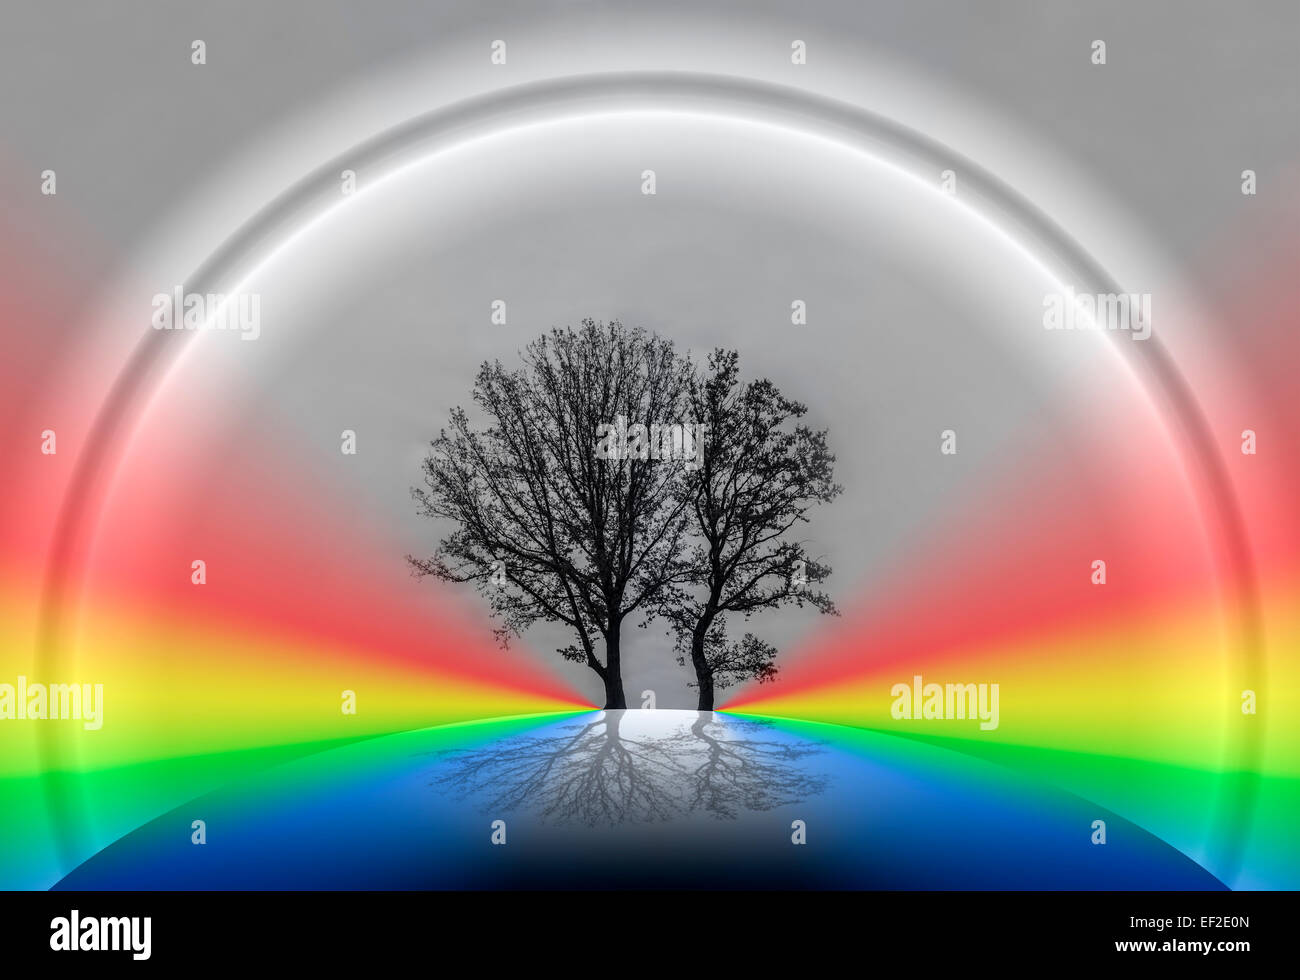 Imaginary winter landscape with a glowing circle and rainbows. Stock Photo